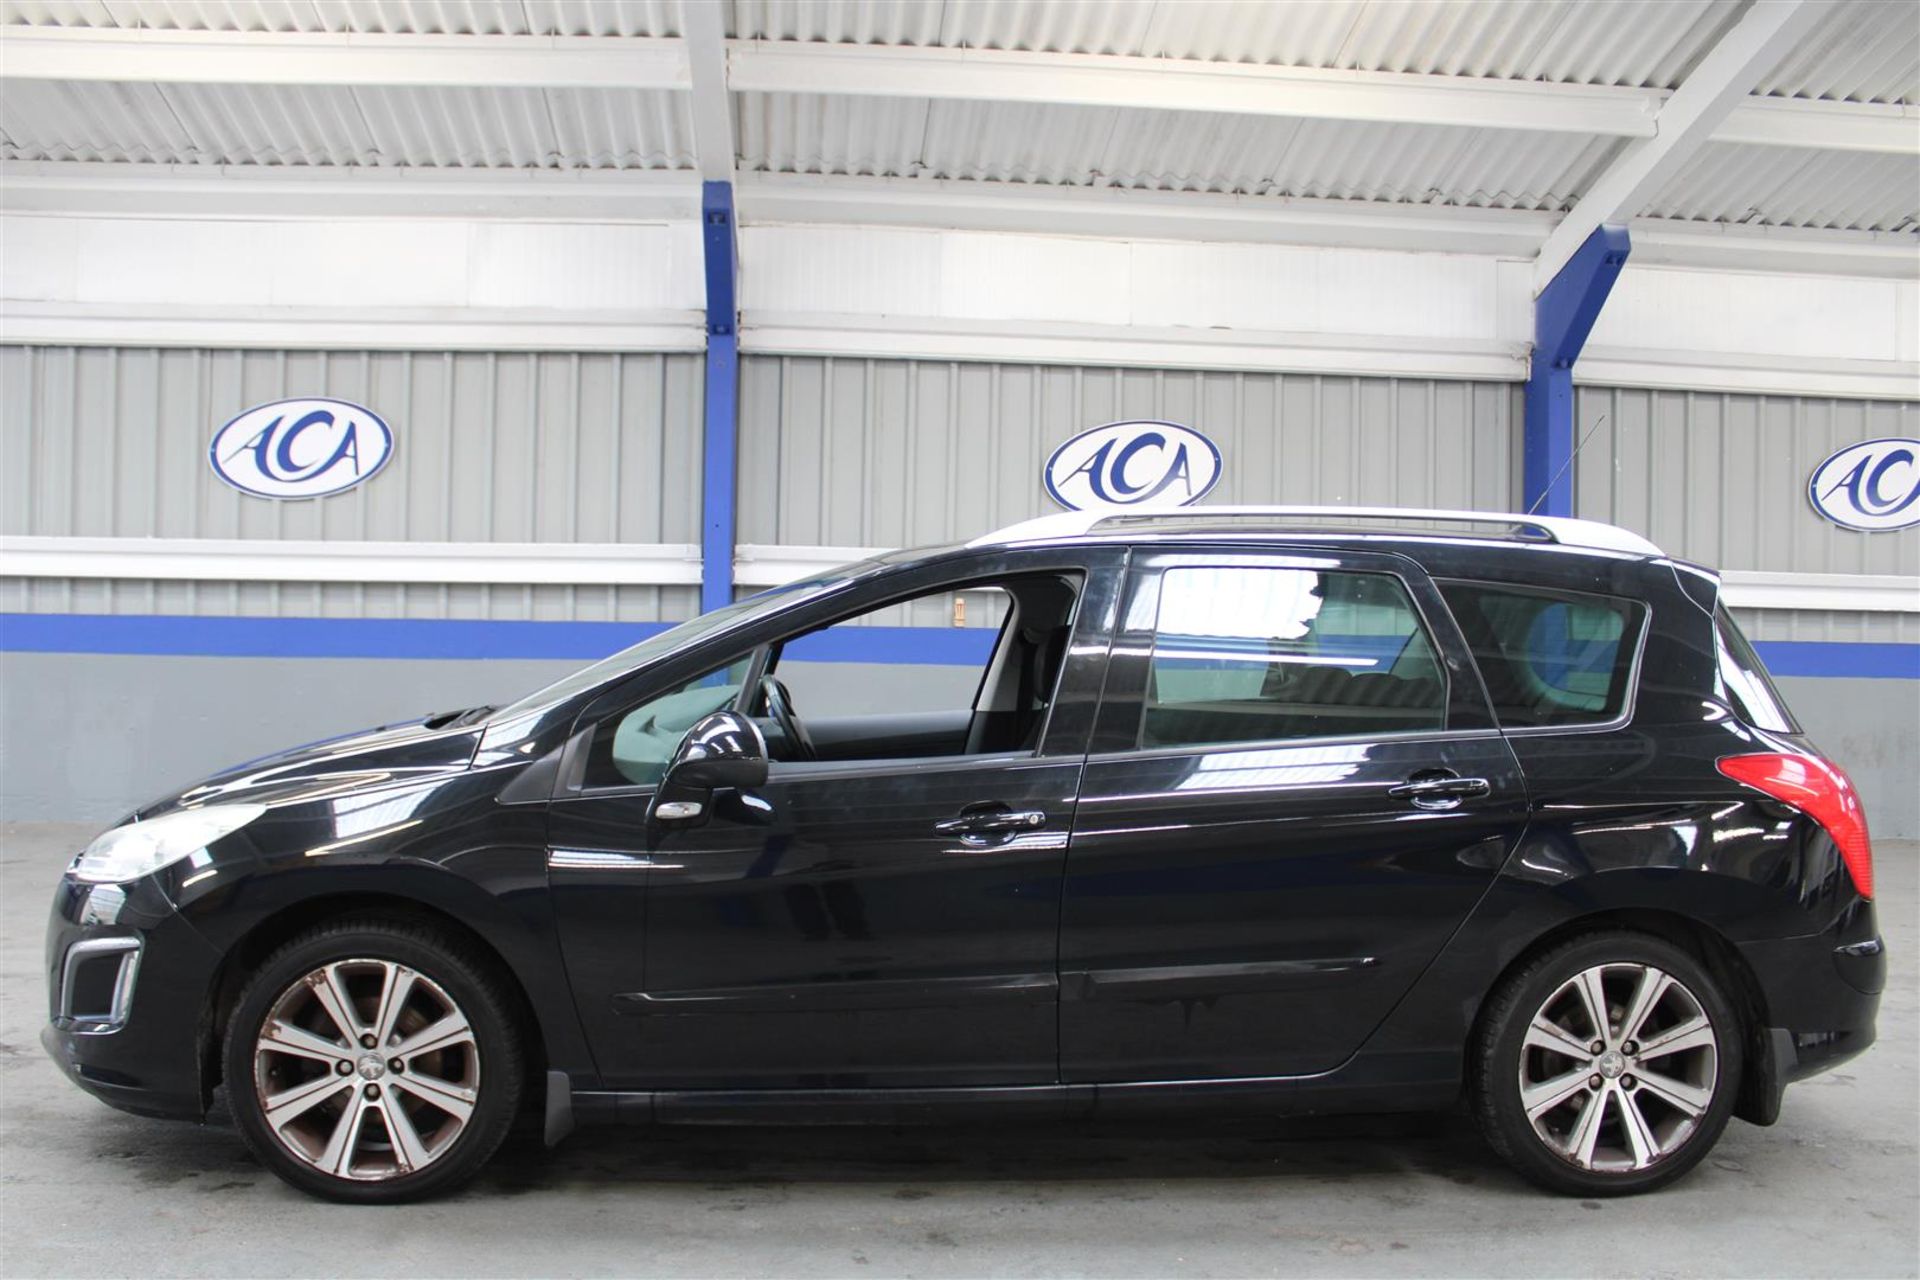 61 11 Peugeot 308 Active SW E-HDI - Image 2 of 32